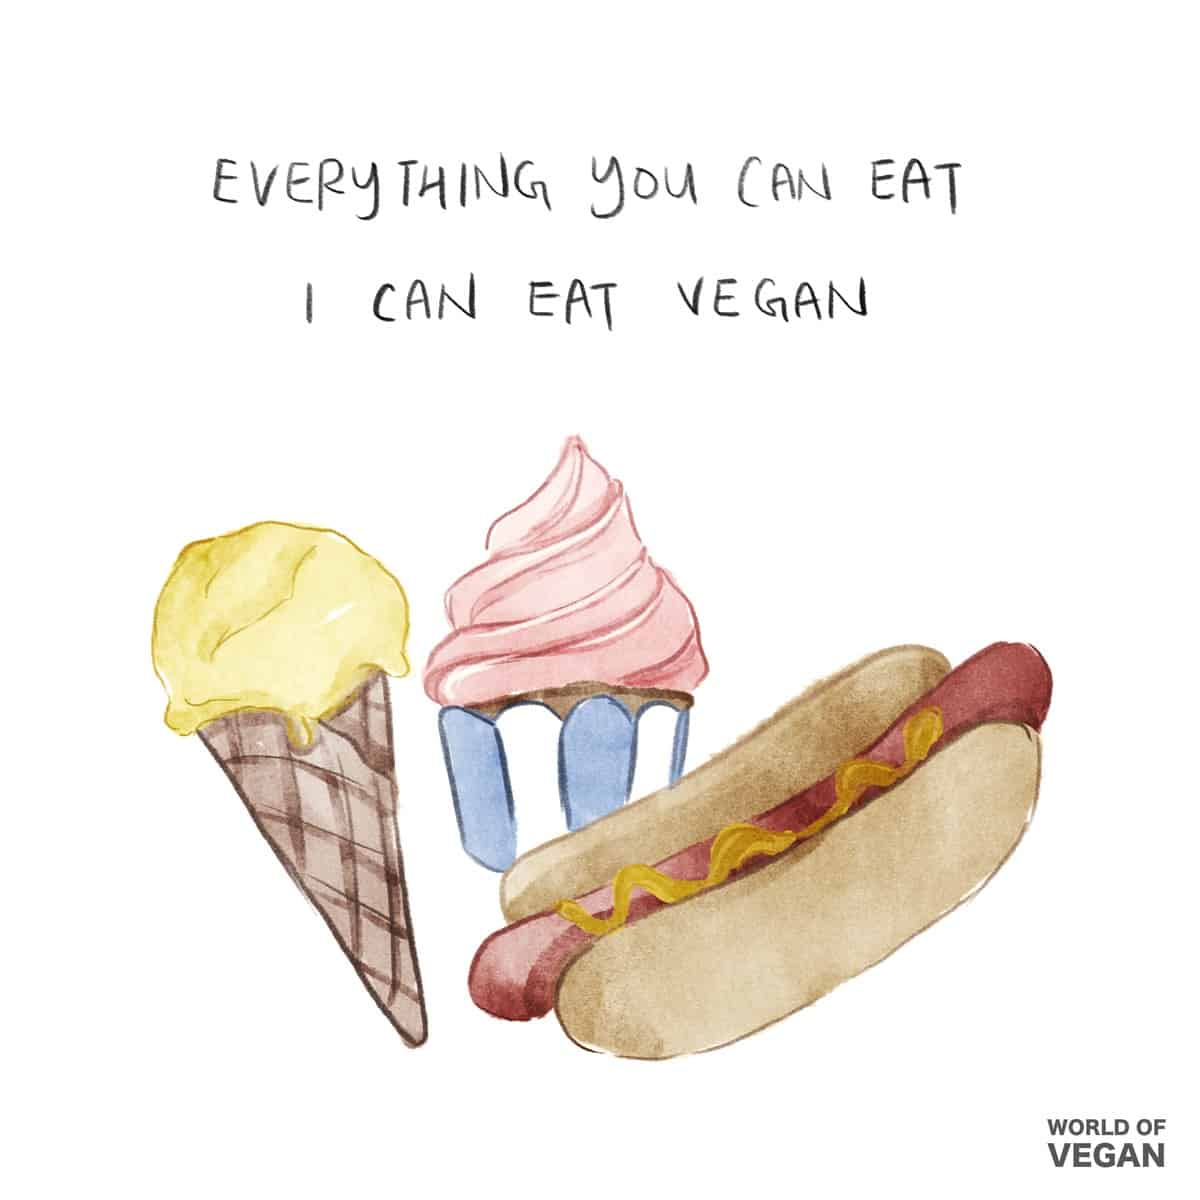 Vegan art illustration of ice cream, a cupcake, and a veggie hot dog with the quote "everything you can eat I can eat vegan!"